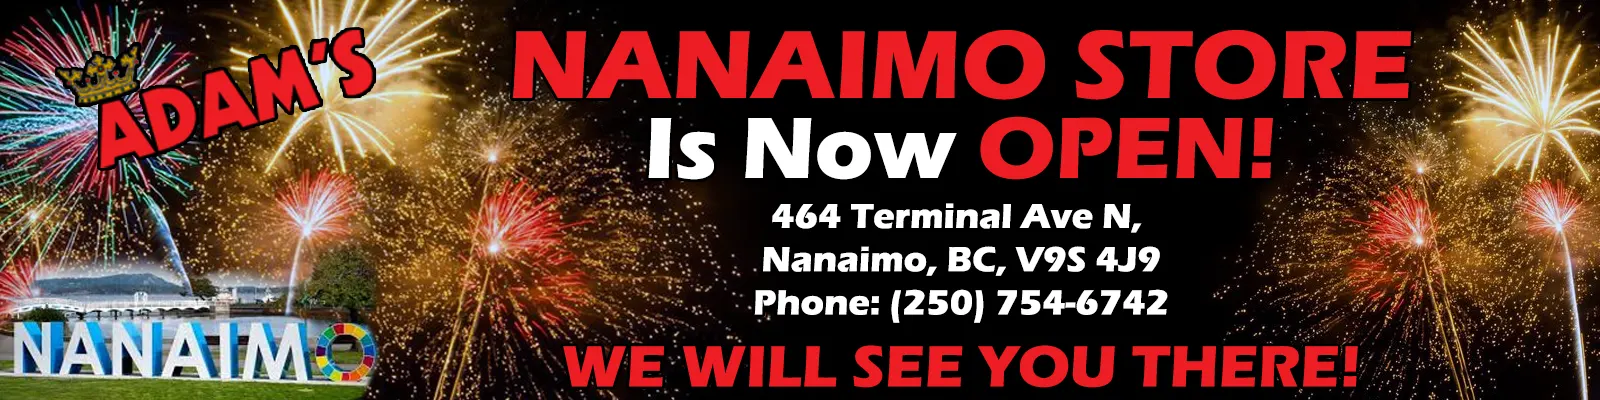 New Adam's Nanaimo Location is now open!